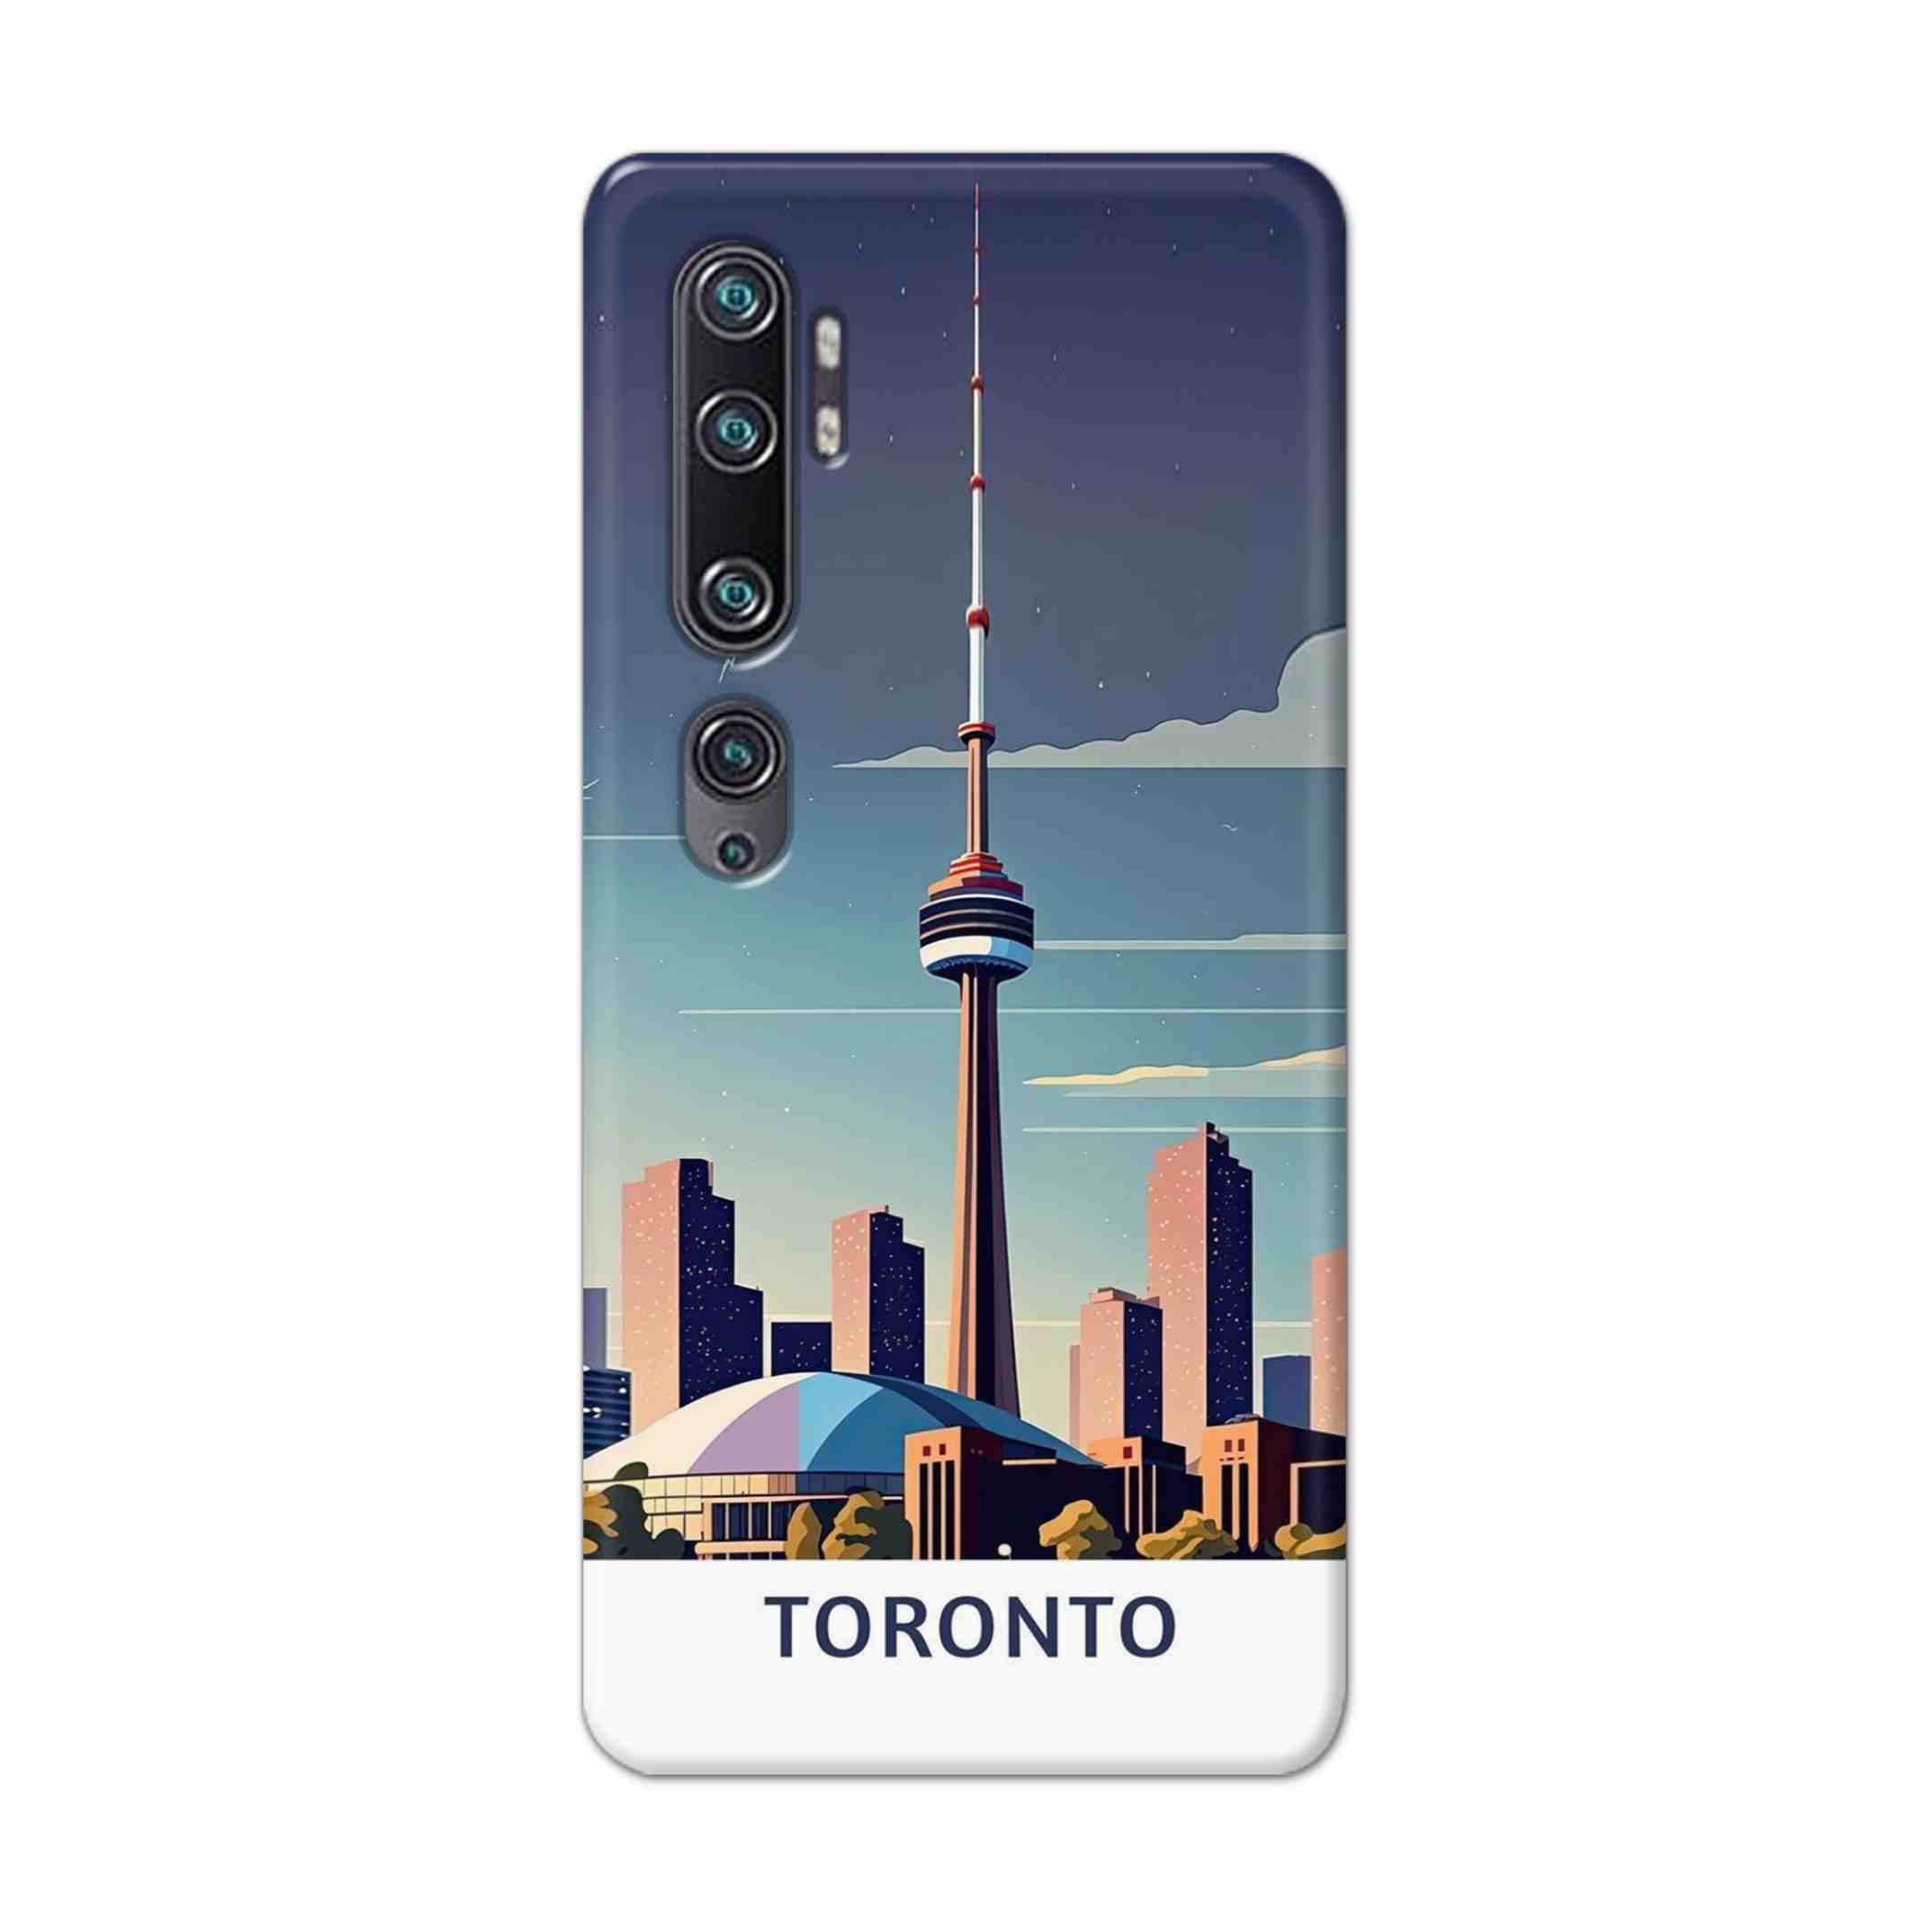 Buy Toronto Hard Back Mobile Phone Case Cover For Xiaomi Mi Note 10 Online